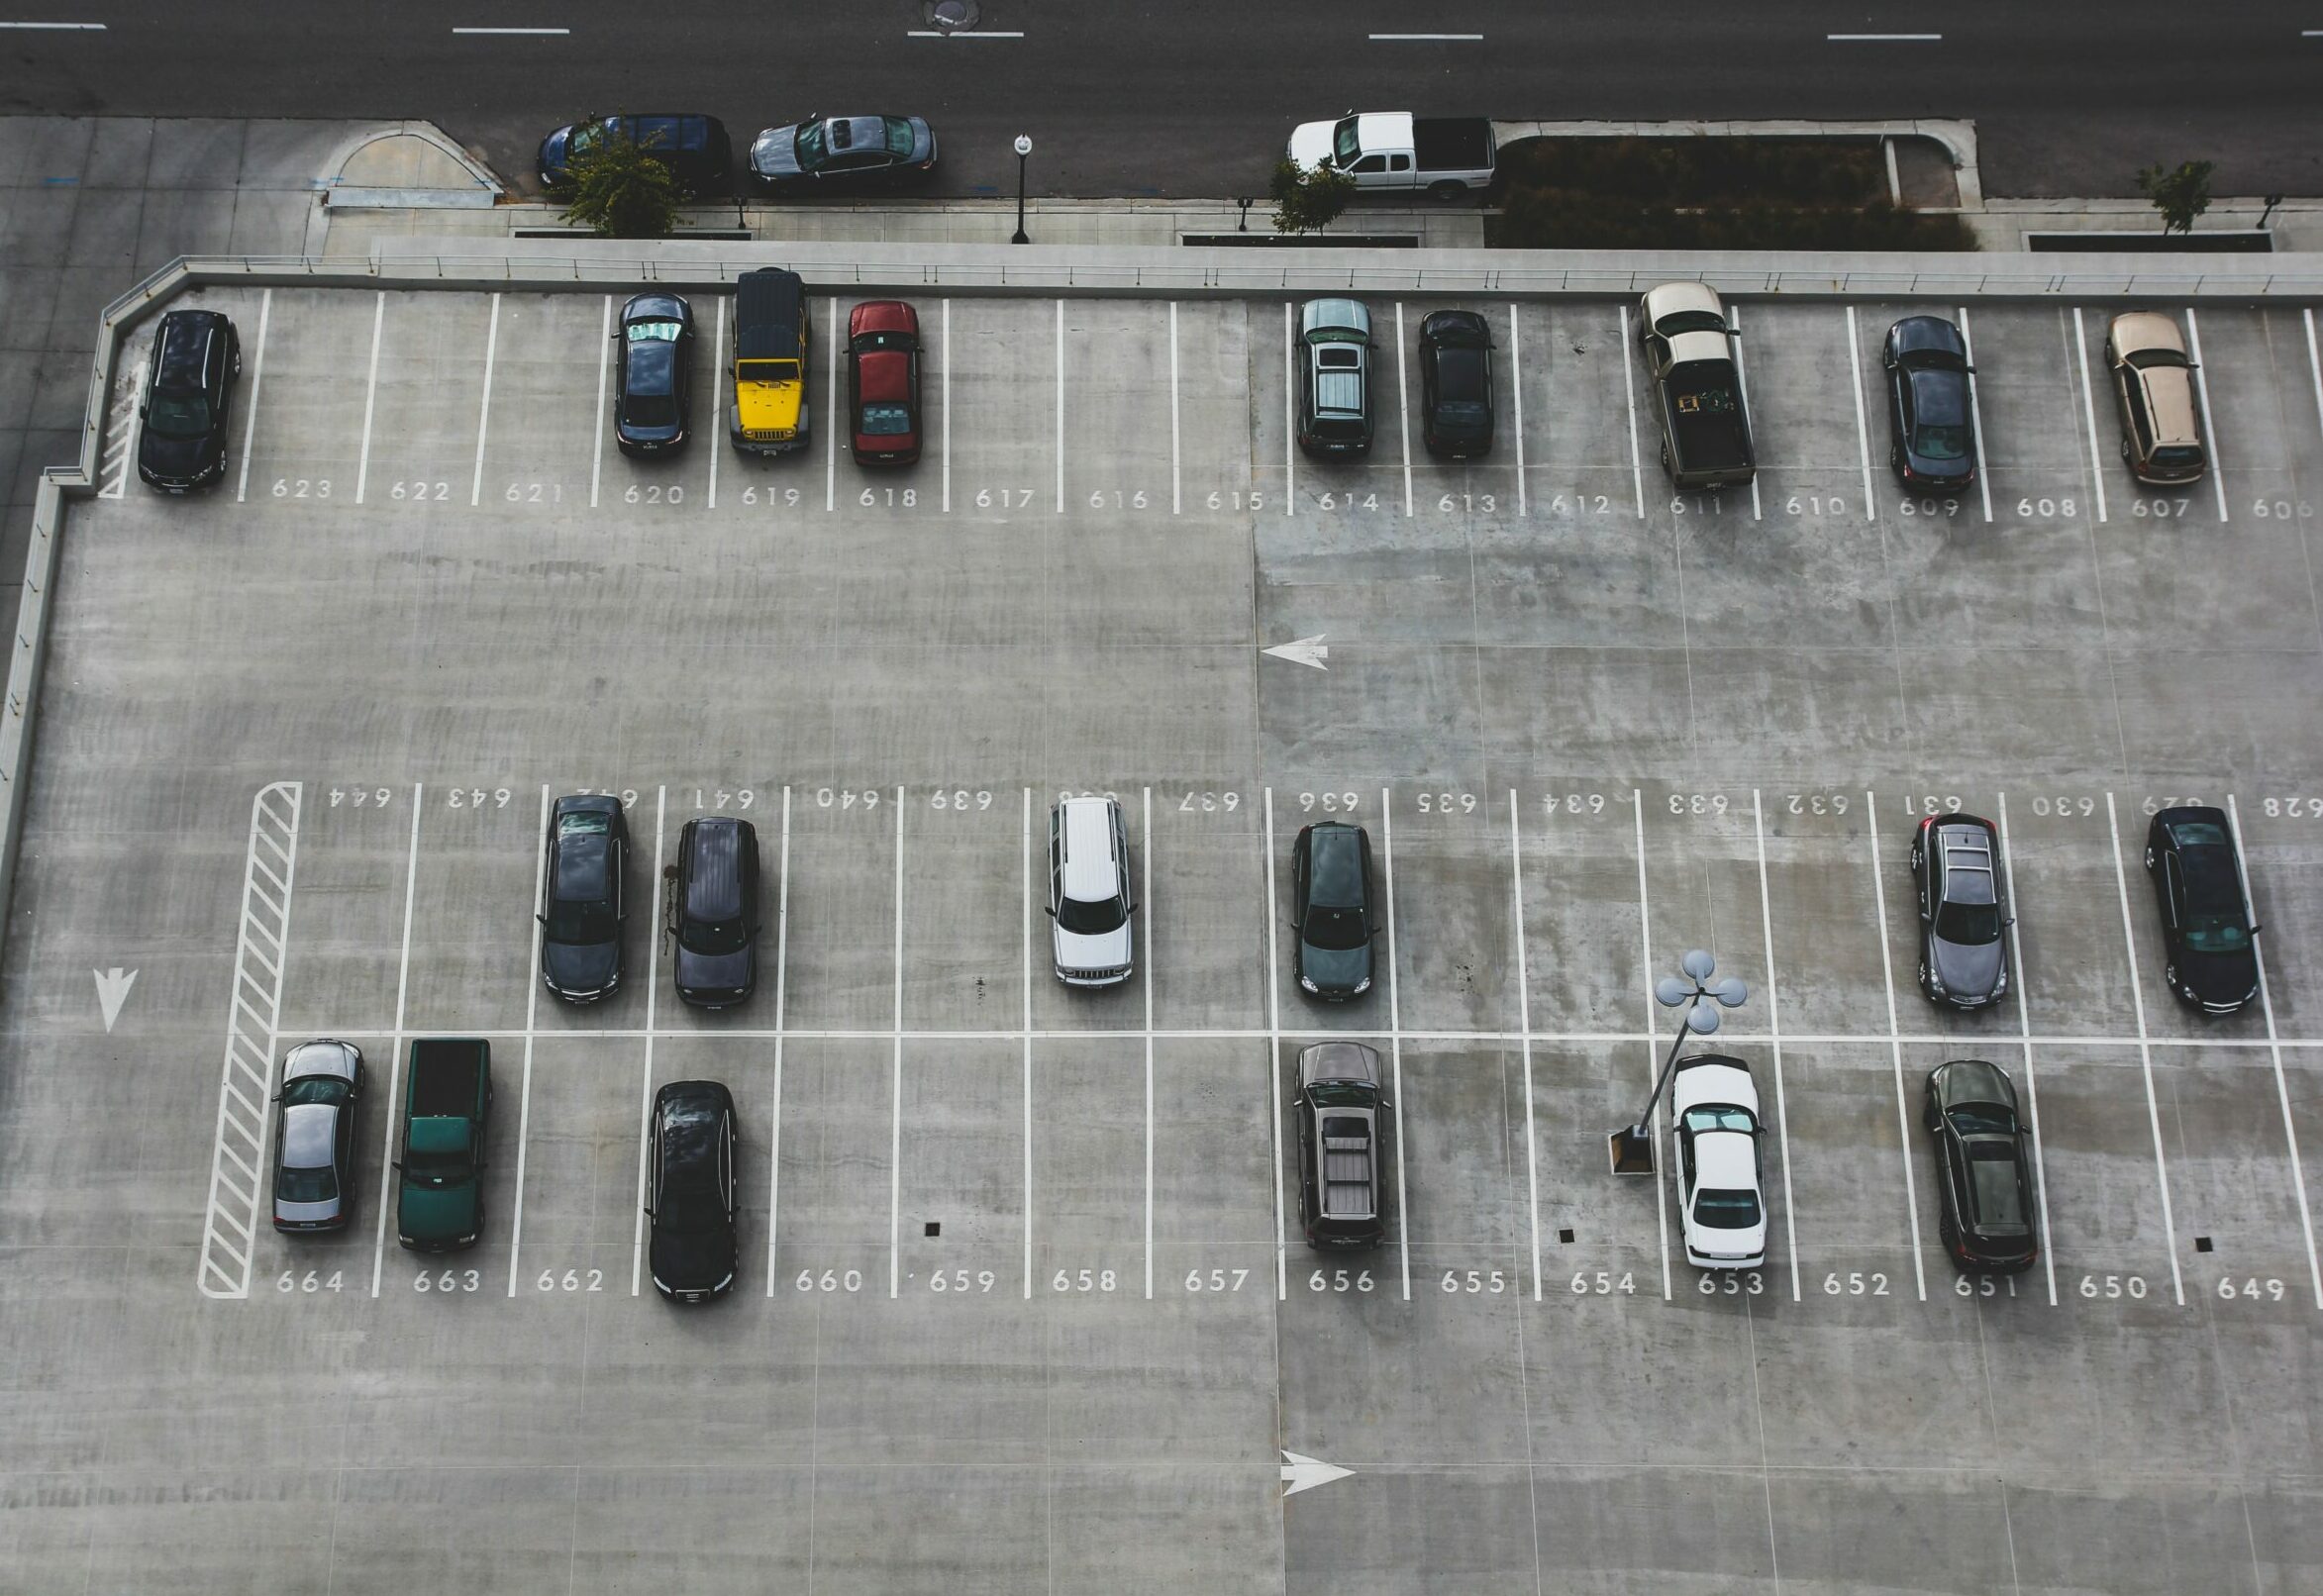 The Washington Post: “Montgomery County leaders want to change parking rules”